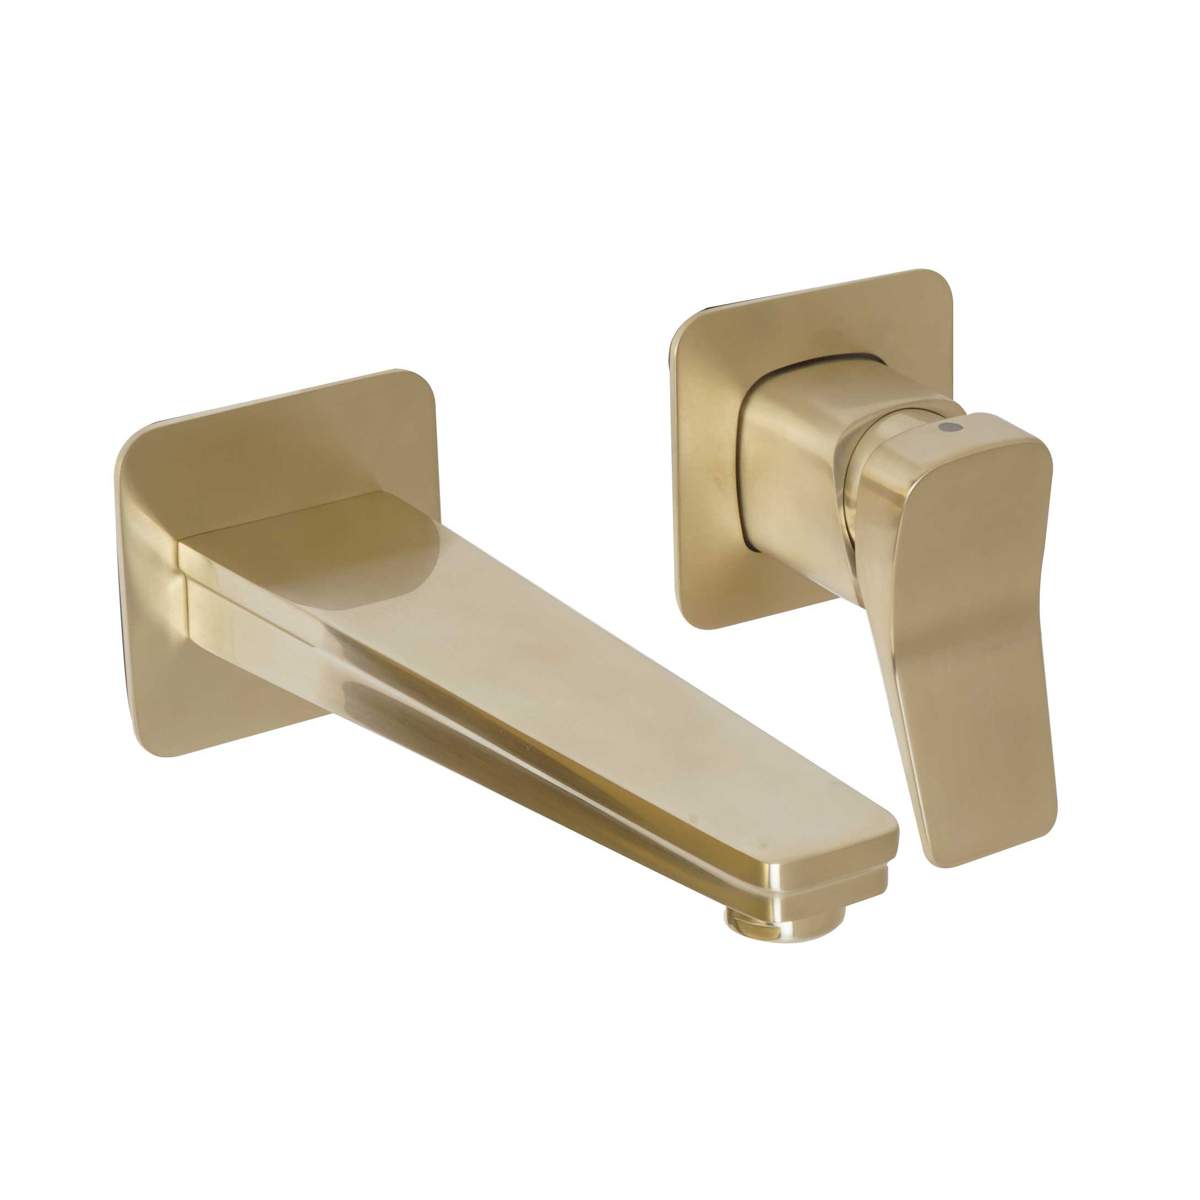 JTP Hix Brushed Brass Single Lever Wall Mounted Basin Mixer - 33273BBR